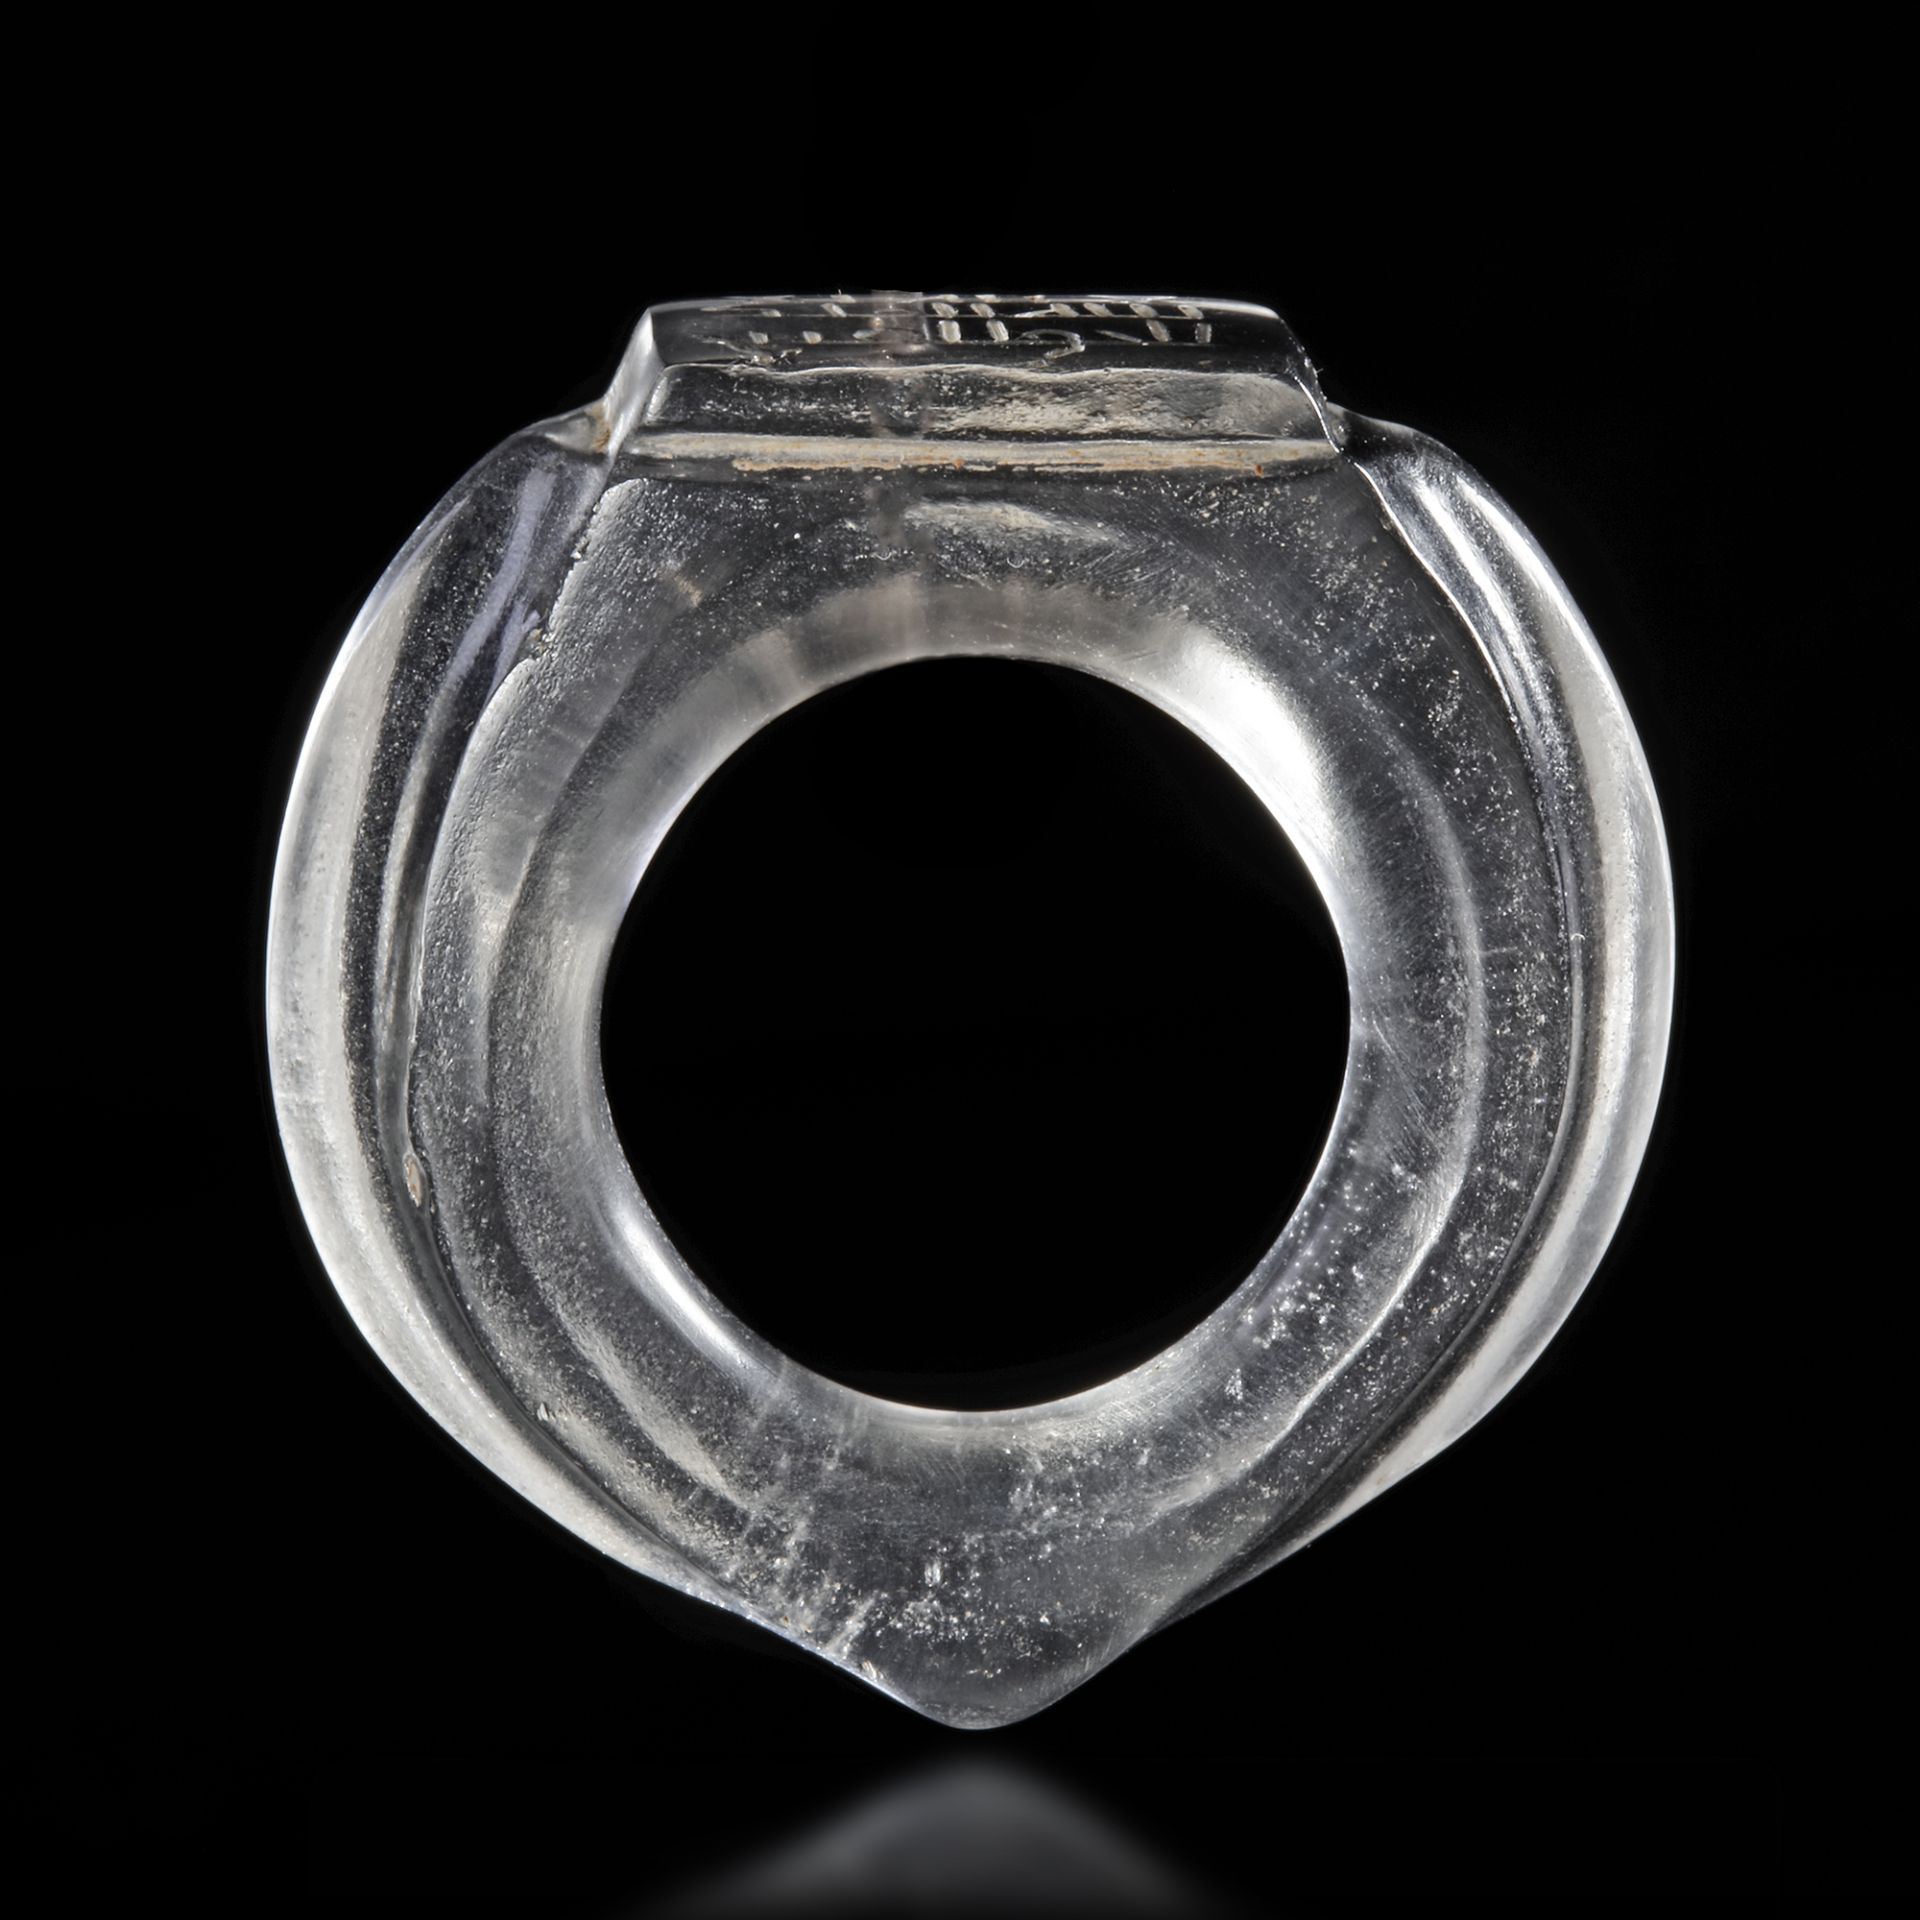 A ROCK CRYSTAL RING, 10TH-12TH CENTURY